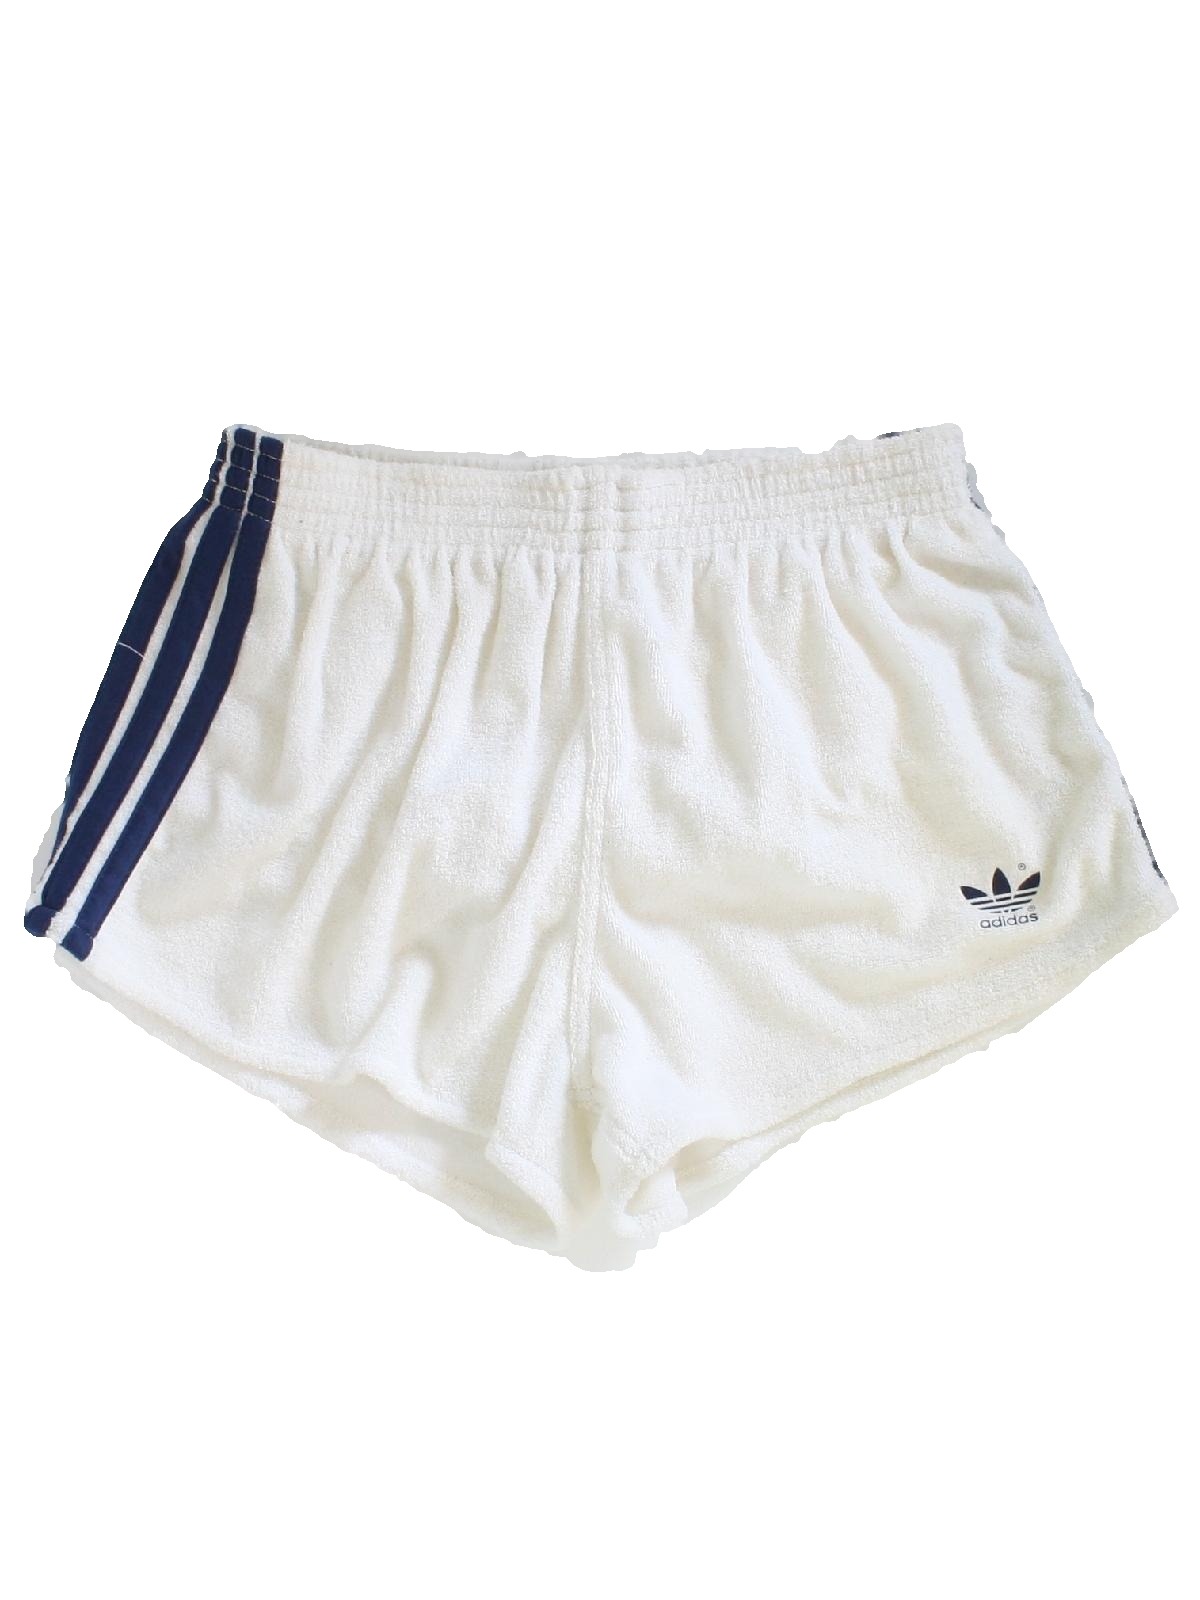 70s Vintage Adidas Shorts: Late 70s or 